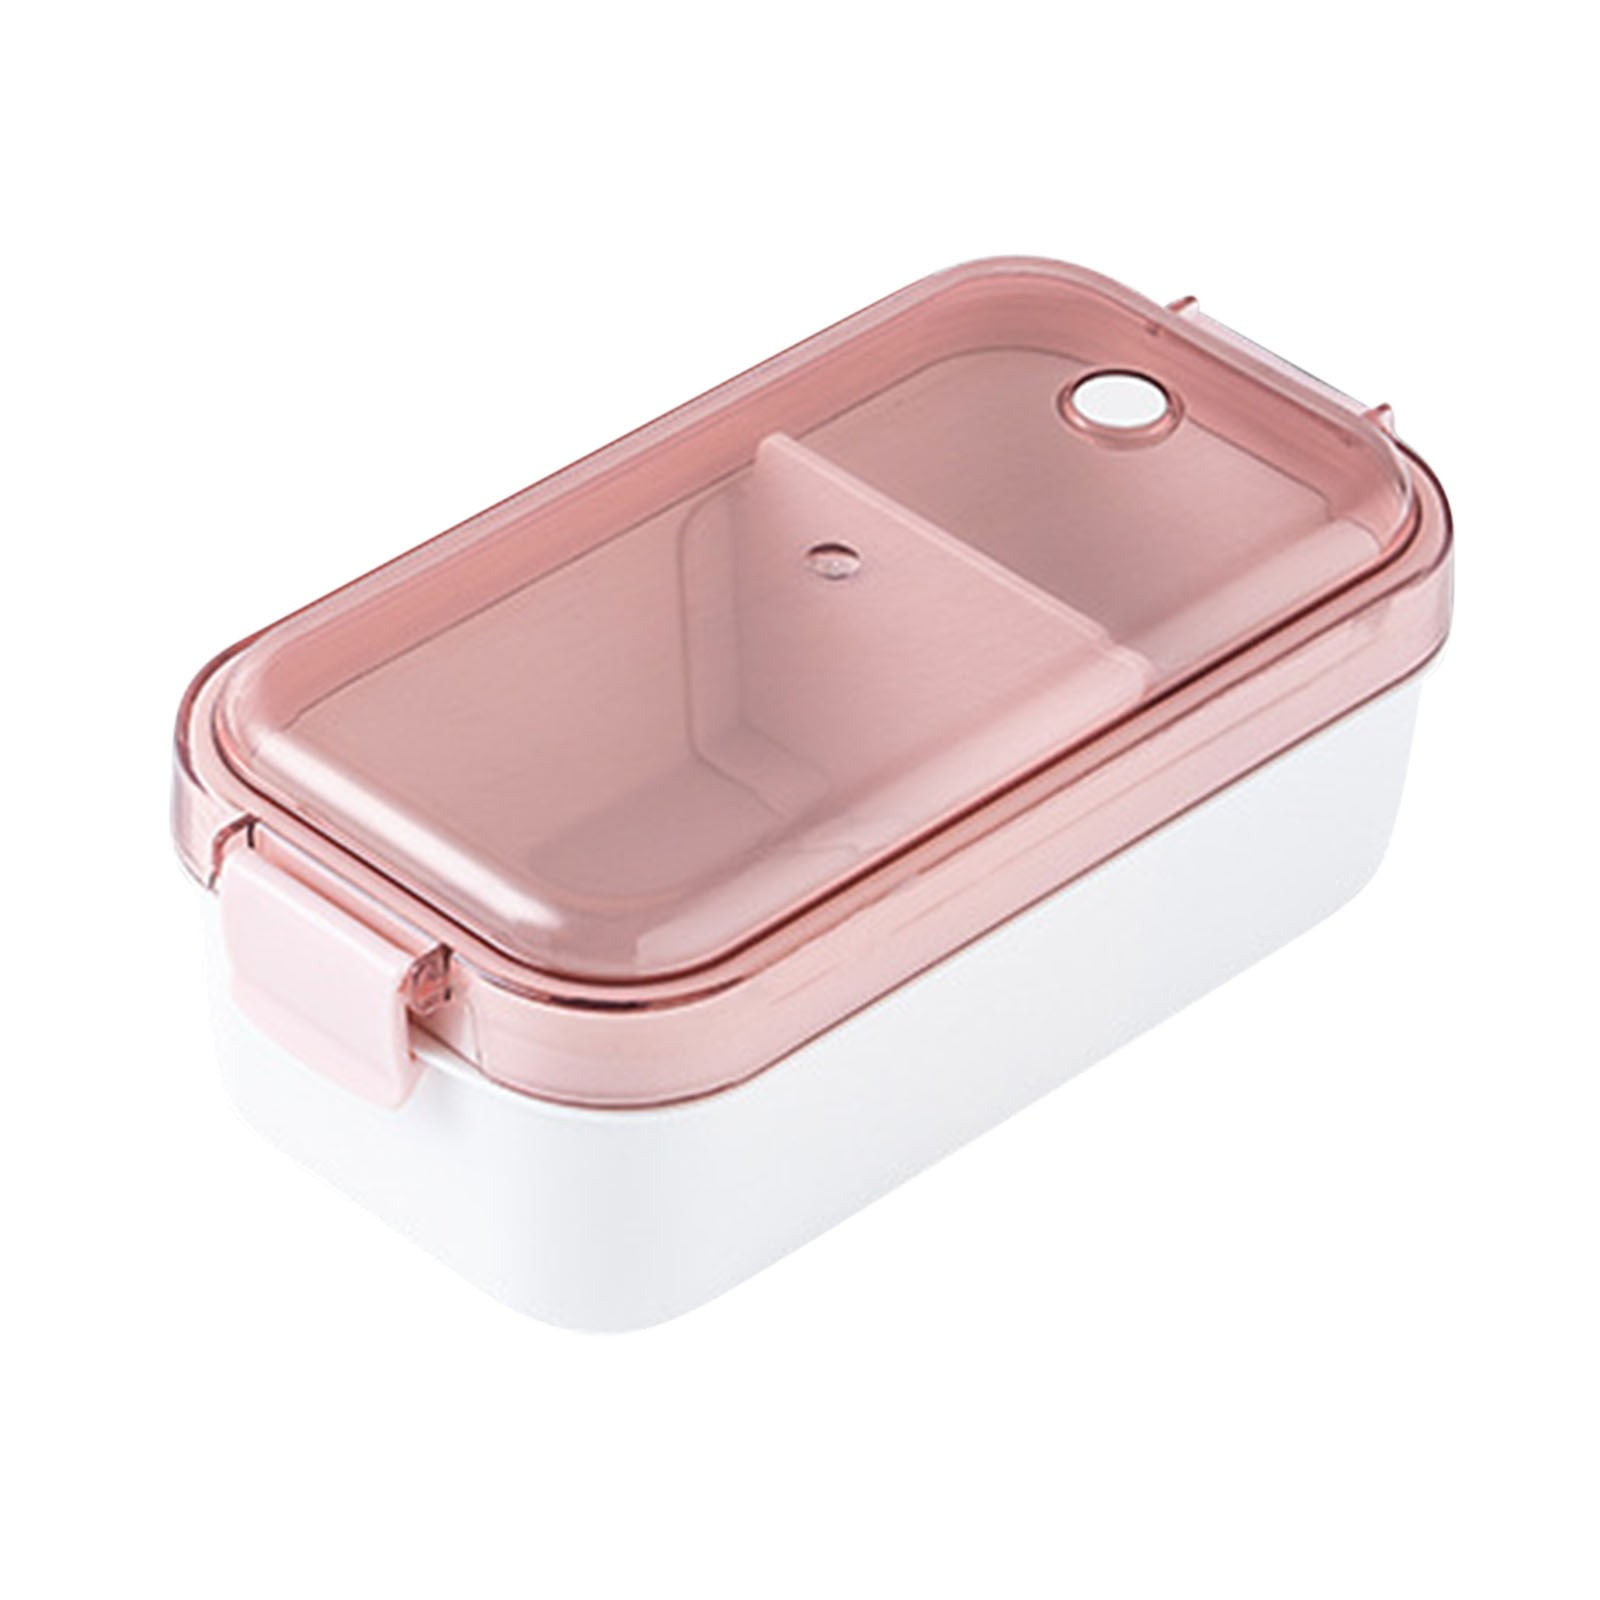 RELEA Rectangular Two Compartments Glass Lunch Box 1040ml Pink 